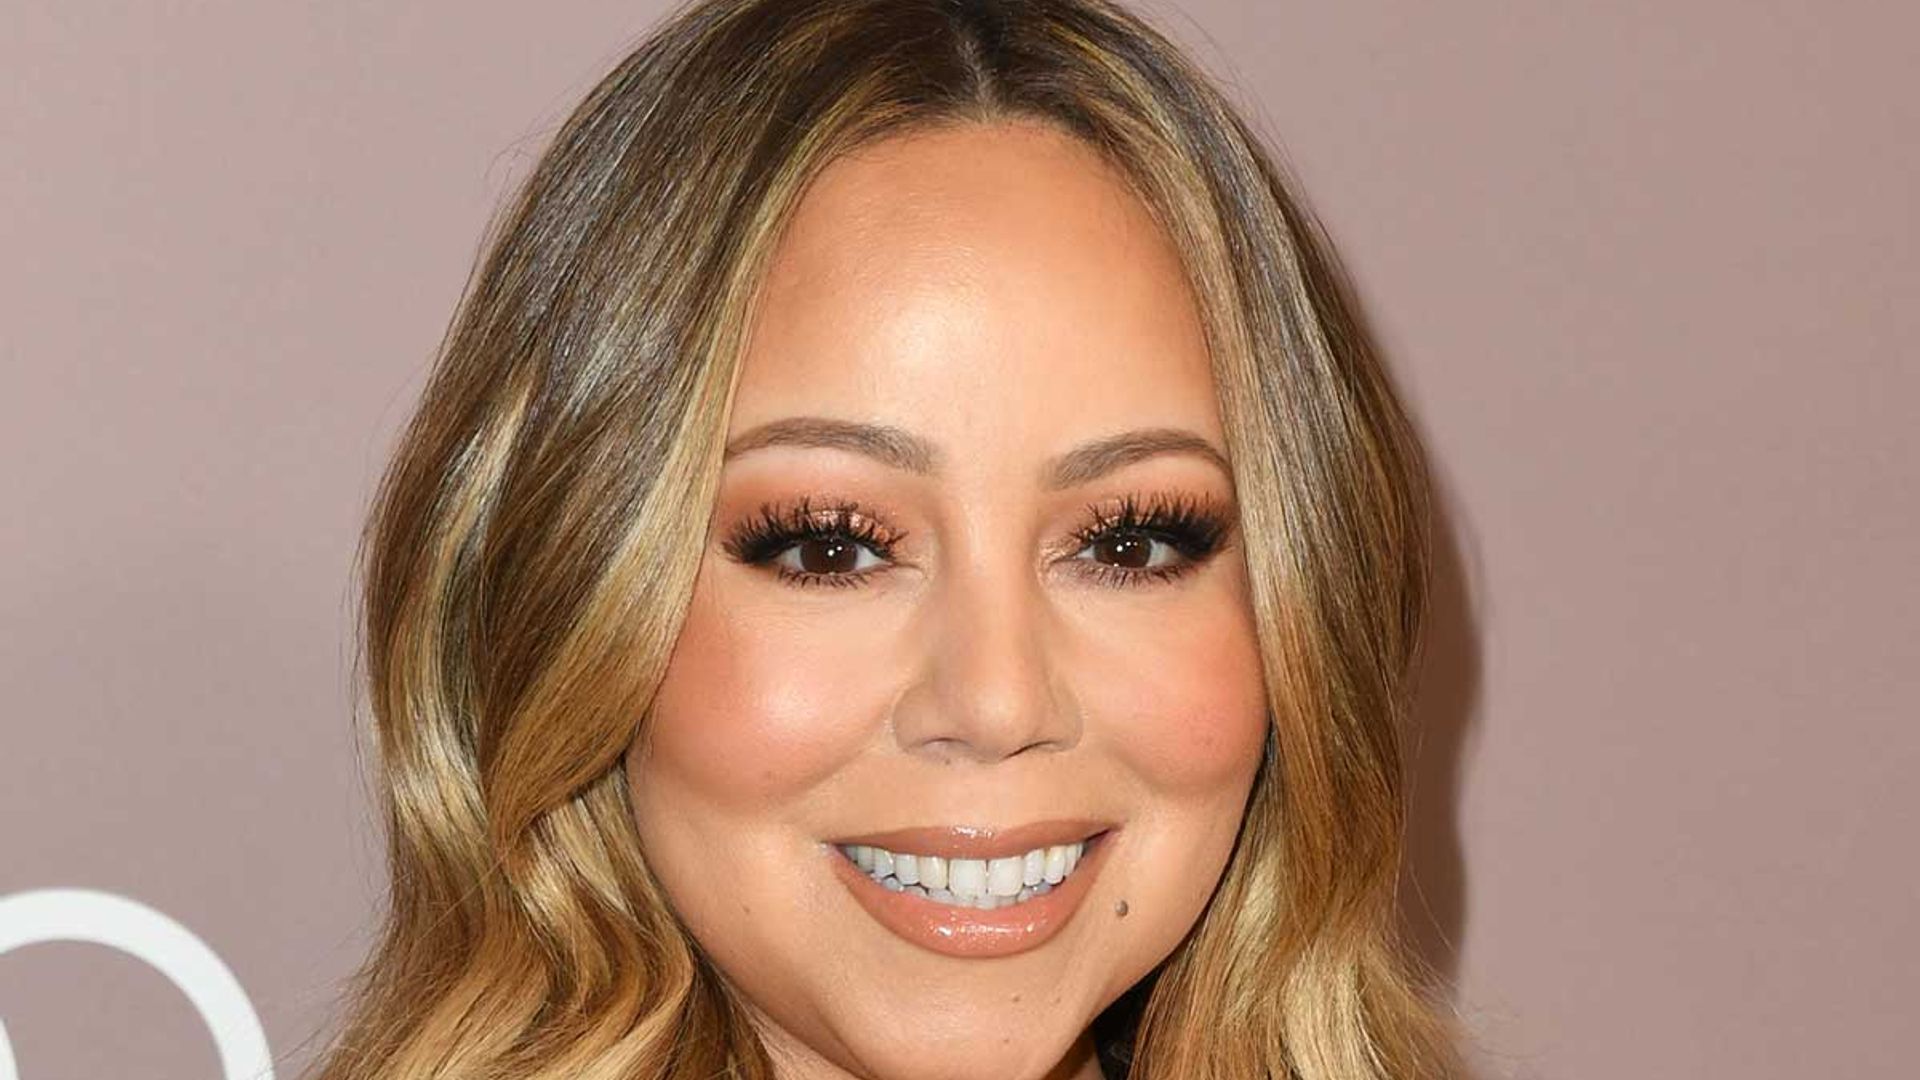 Mariah Carey: Latest News & Pictures from the Singer-Songwriter